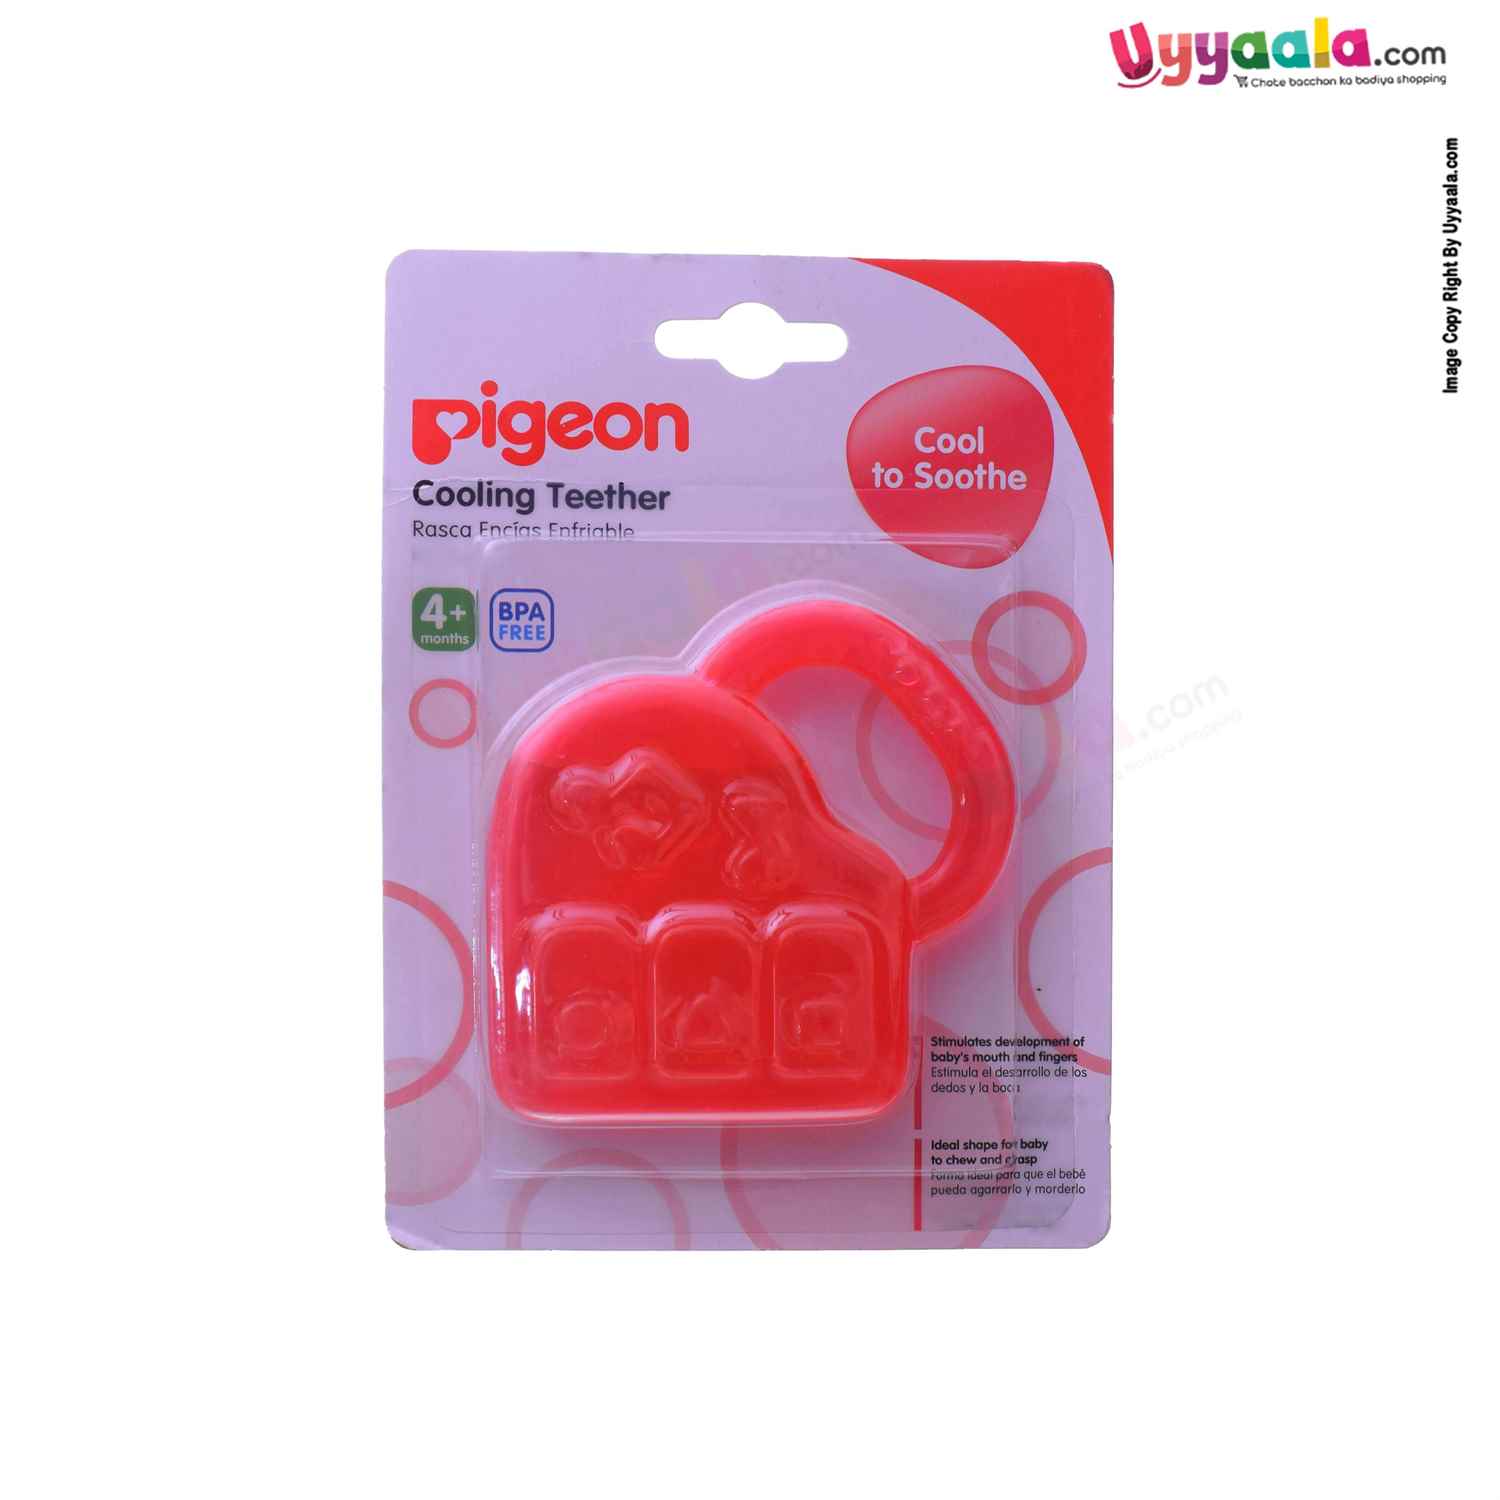 PIGEON Cooling Teether for Babies 4+m Age, Red